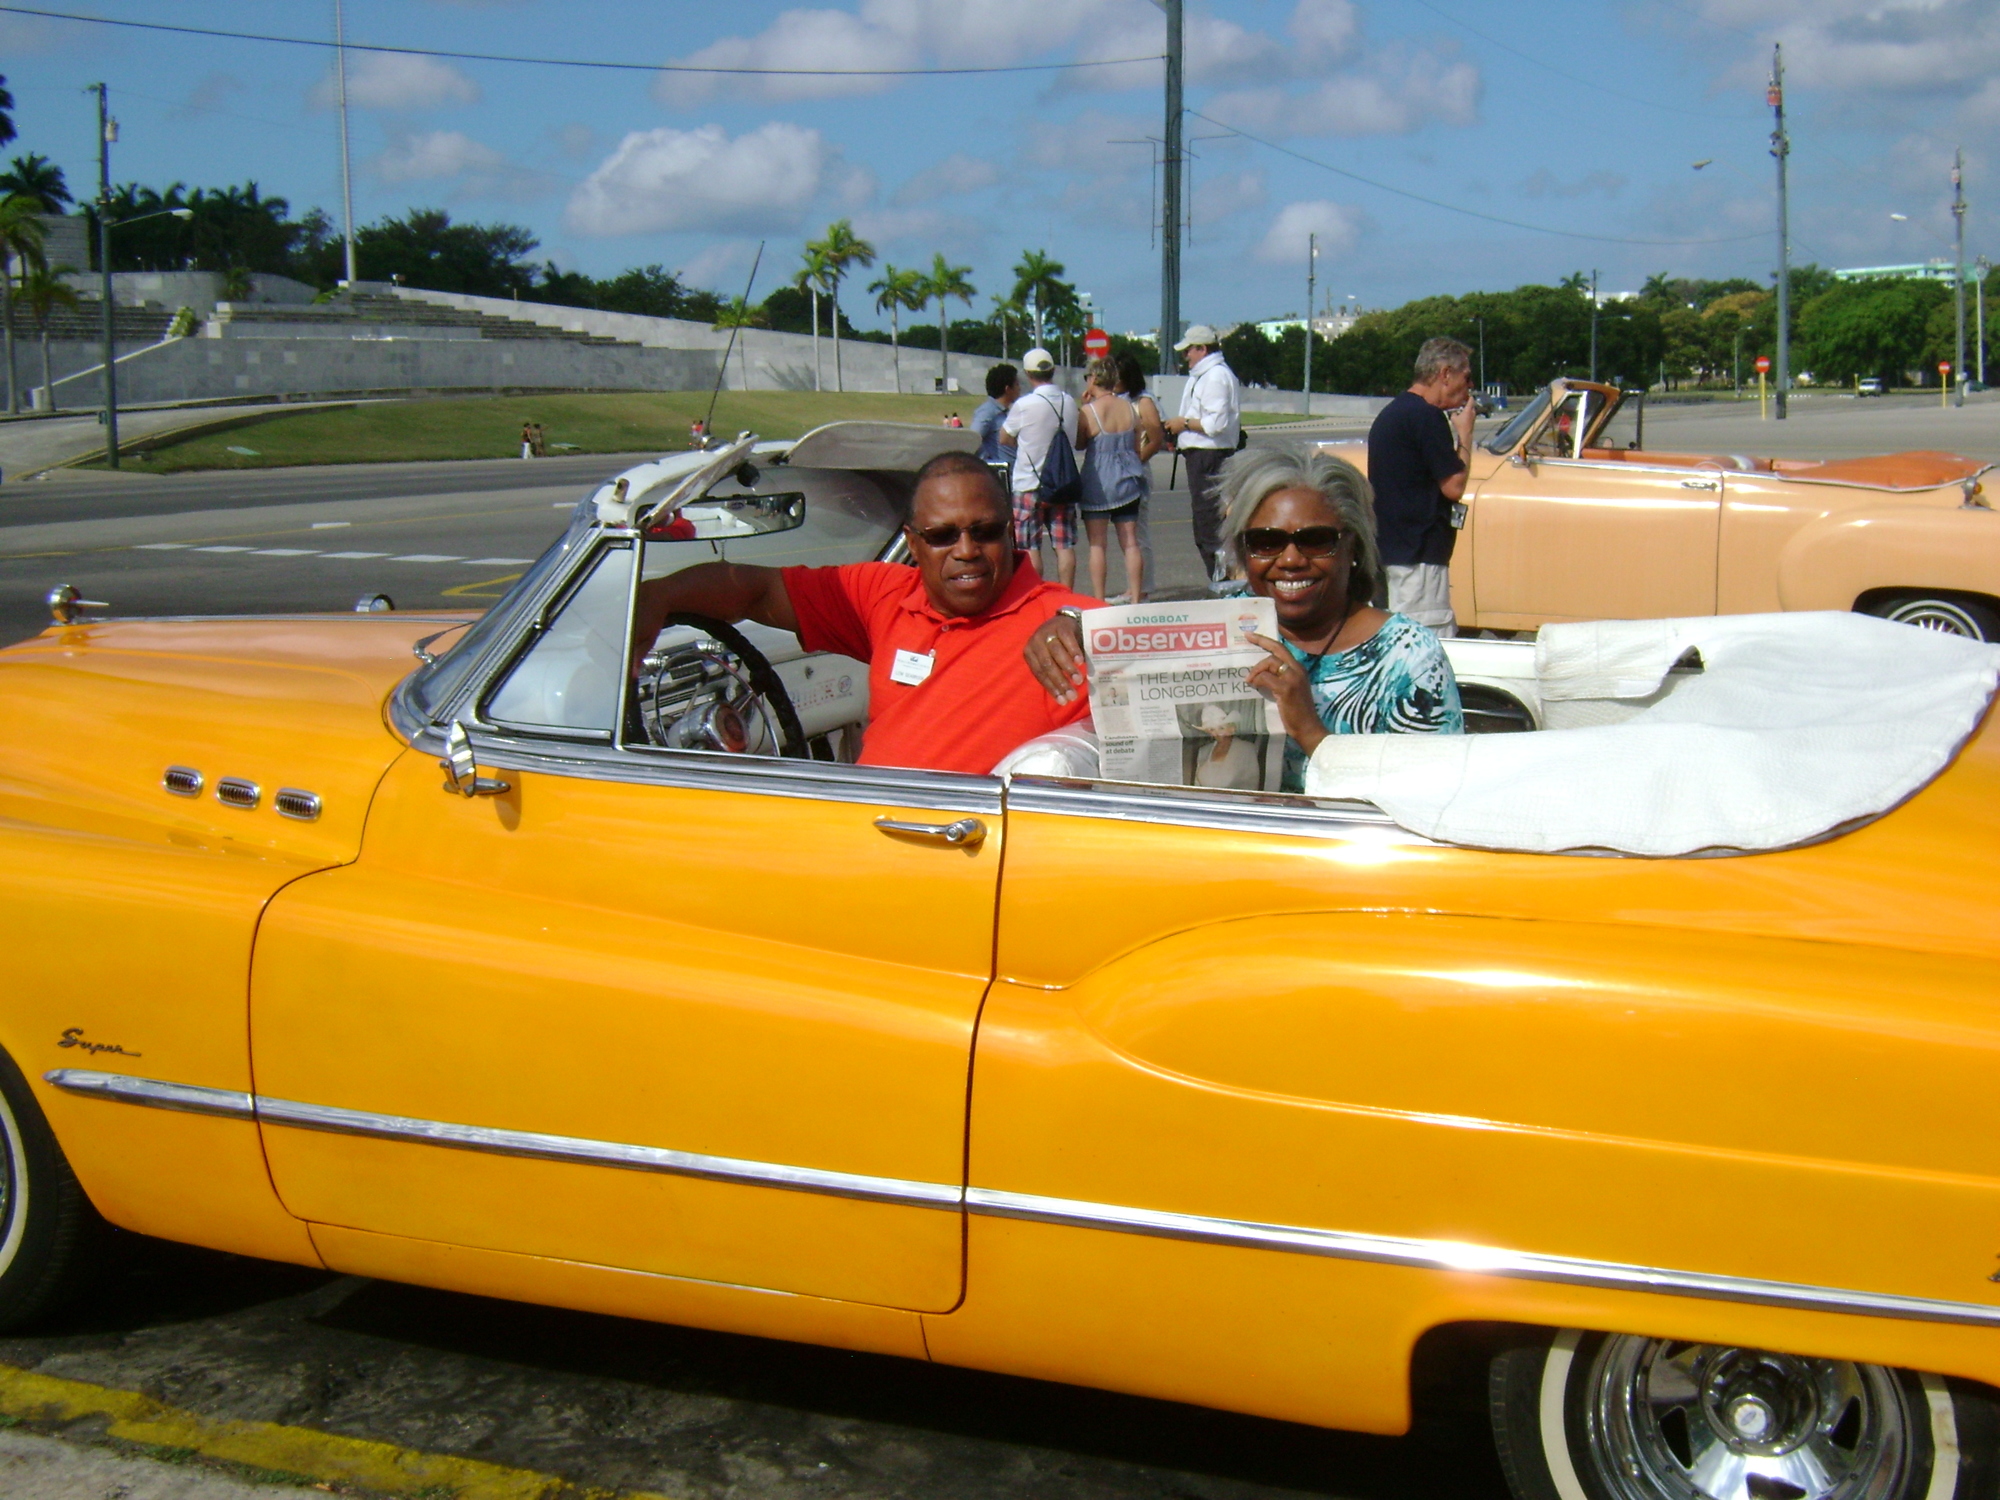 Michele Hooper and Lemuel Seabrook catch up on their Observer news in a 1950s-era car in Cuba.